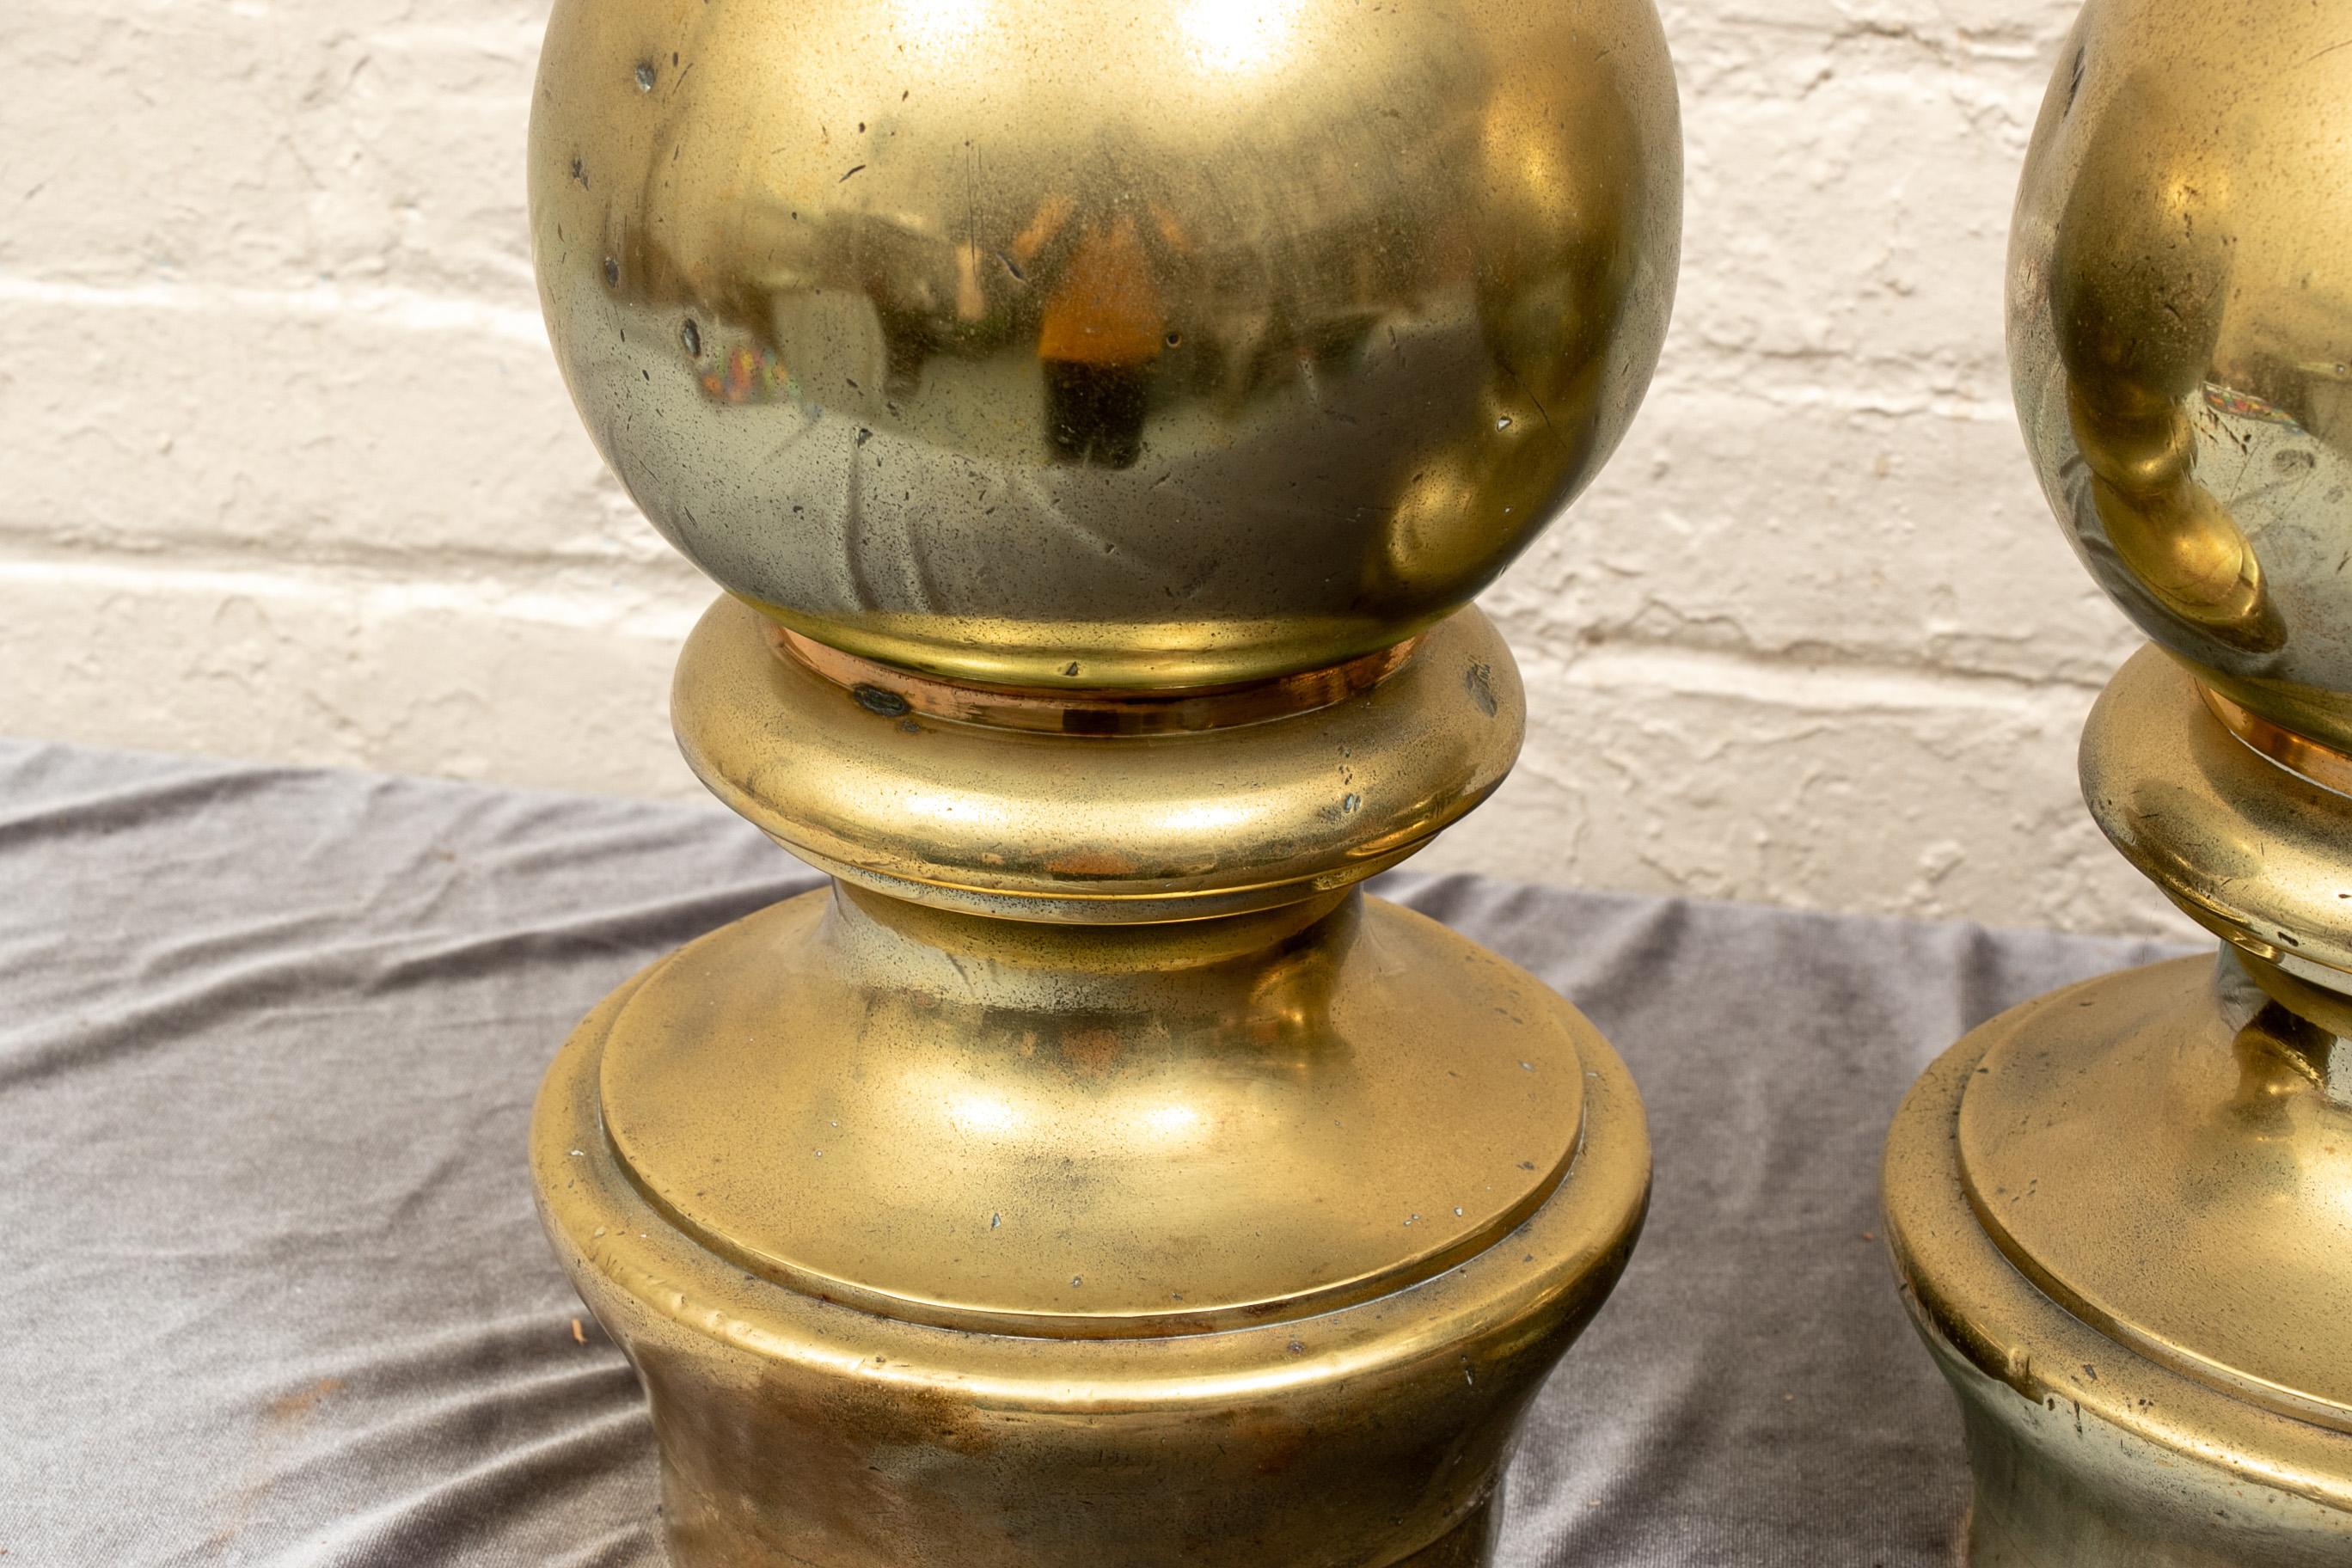 Pair of antique brass bollards. A spherical top over a short turned standard and raised on a circular stepped base. Drill holes along base allowing to be affixed to boat deck. 

Condition: Good condition with expected signs of use, some sporadic